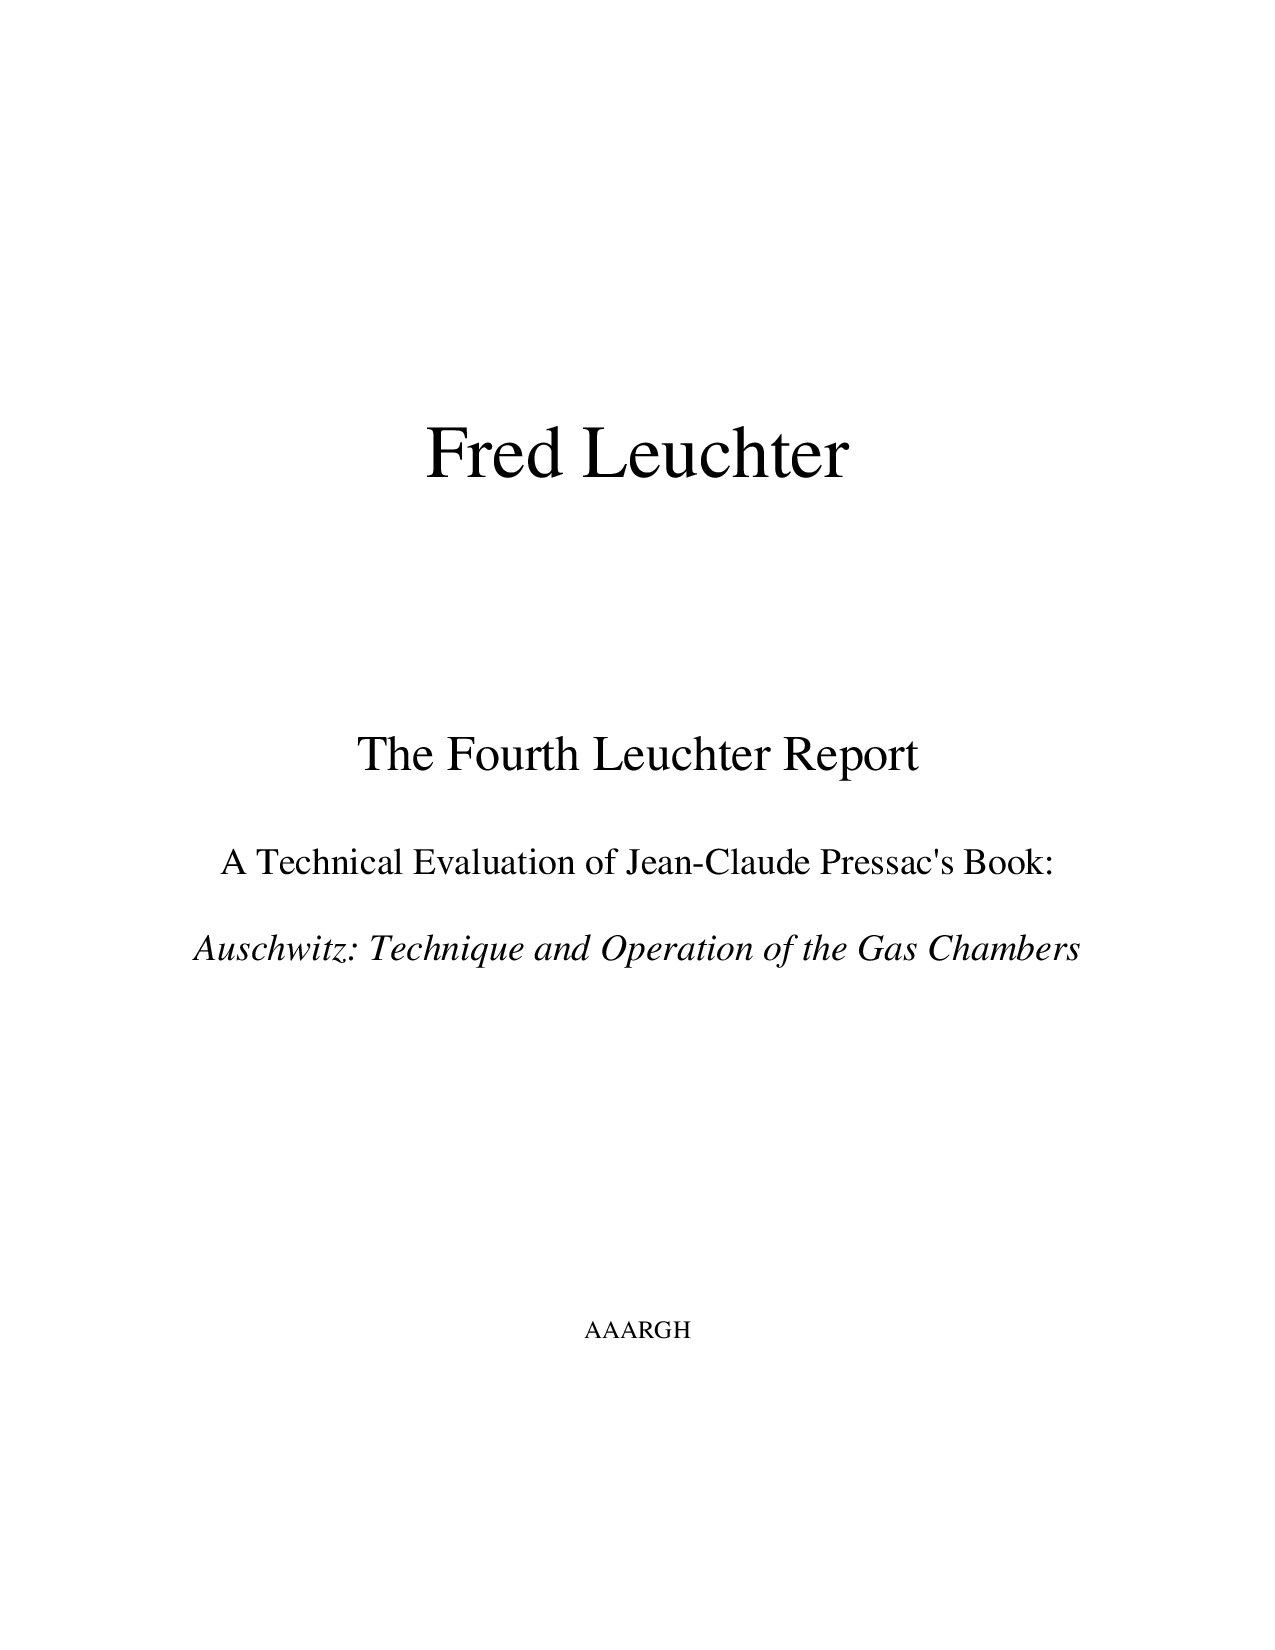 The Fourth Leuchter Report